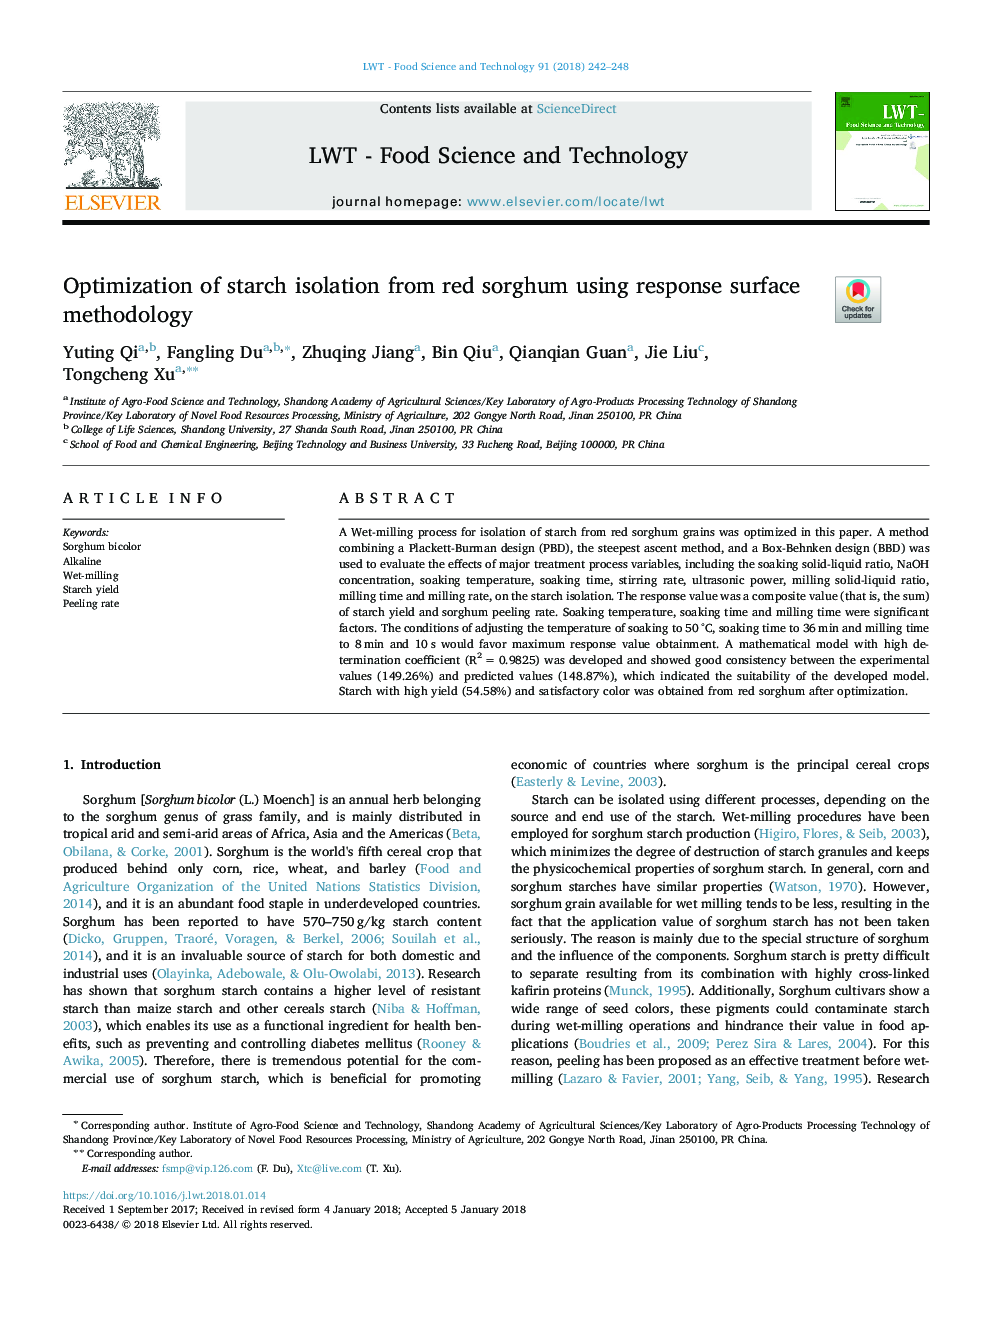 Optimization of starch isolation from red sorghum using response surface methodology